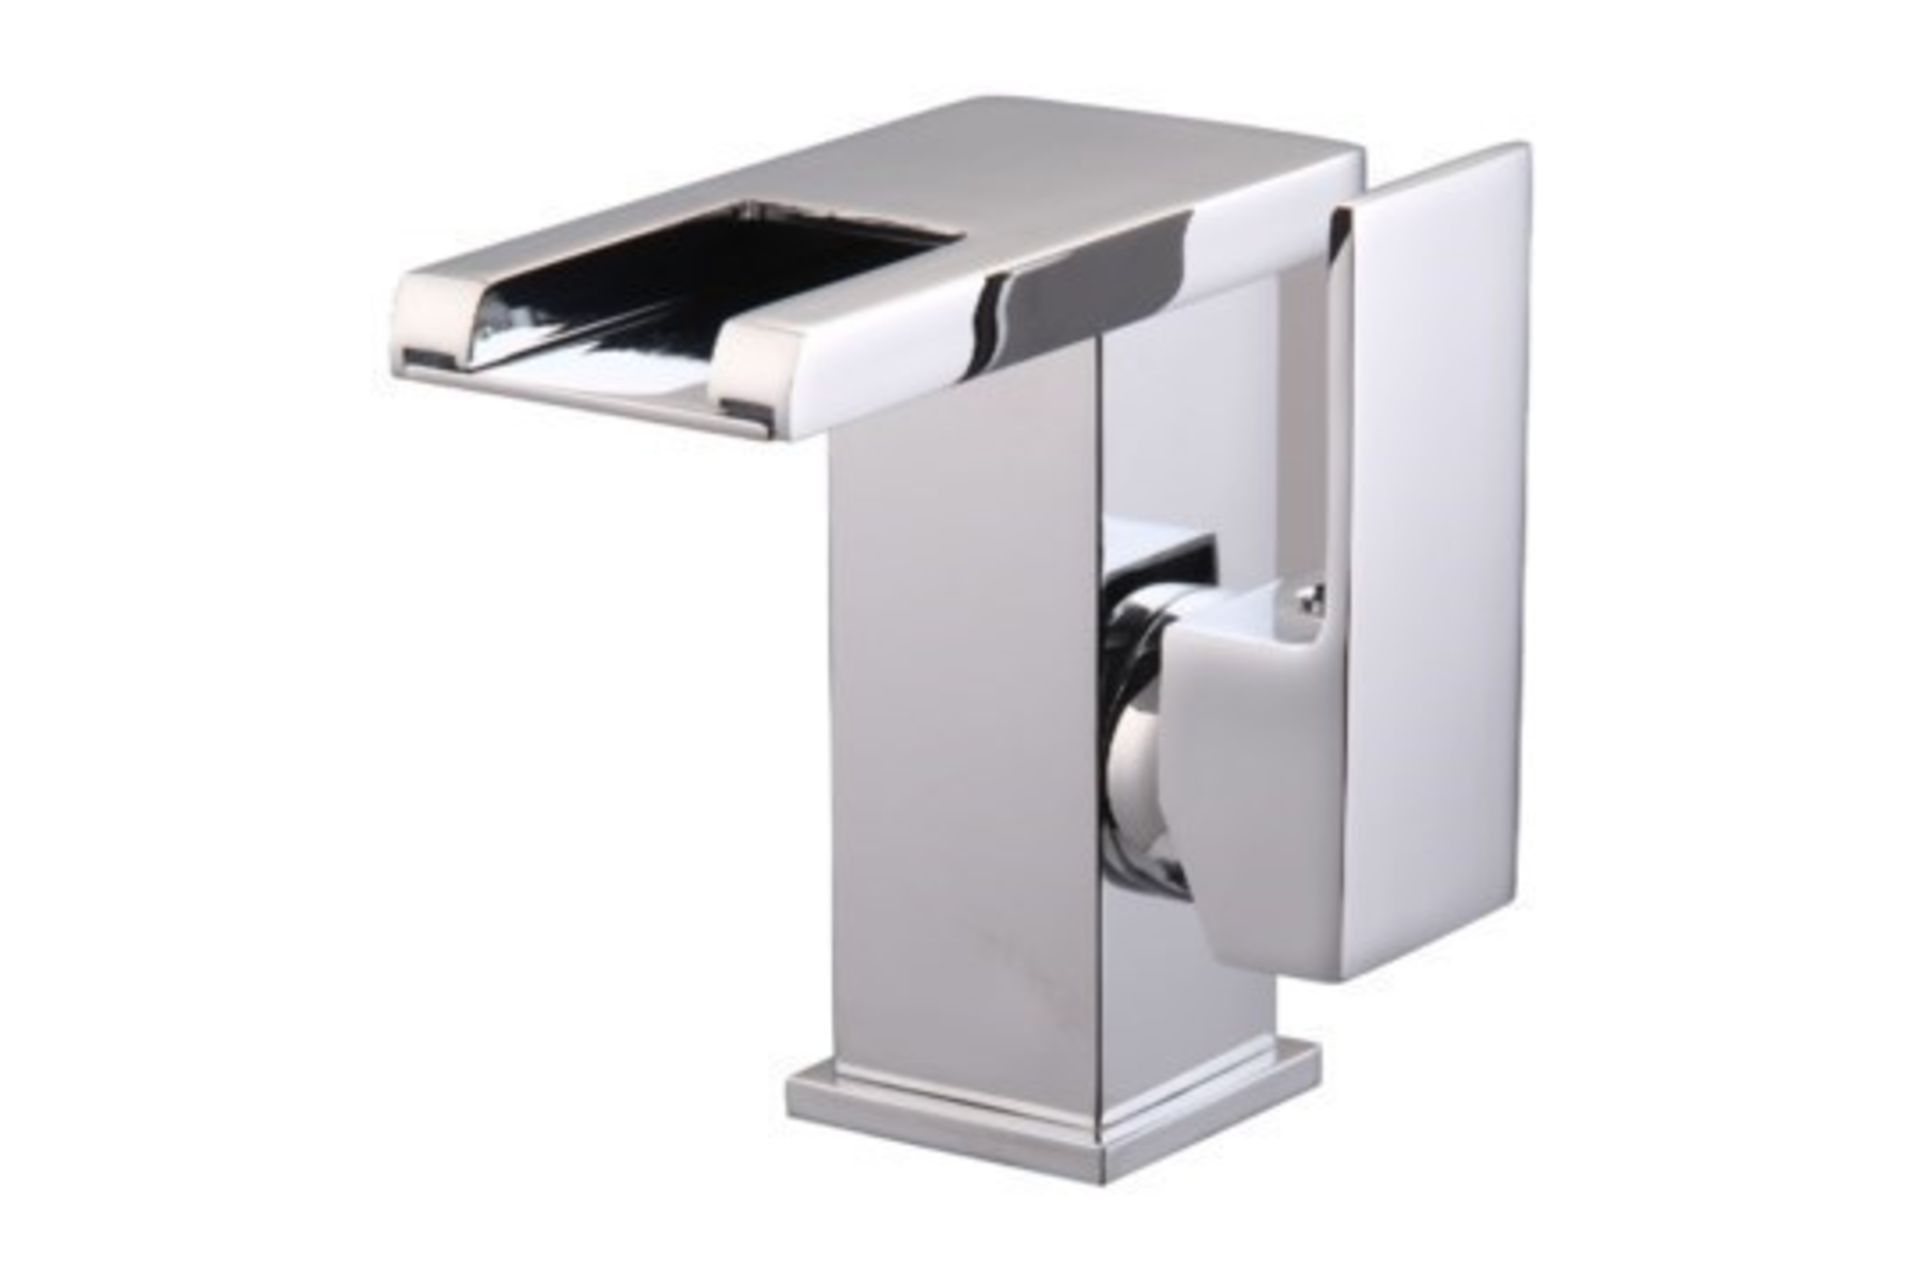 (QT1020) LED Waterfall Bathroom Basin Mixer Tap. RRP £229.99.Easy to install and clean. All ... - Image 4 of 4